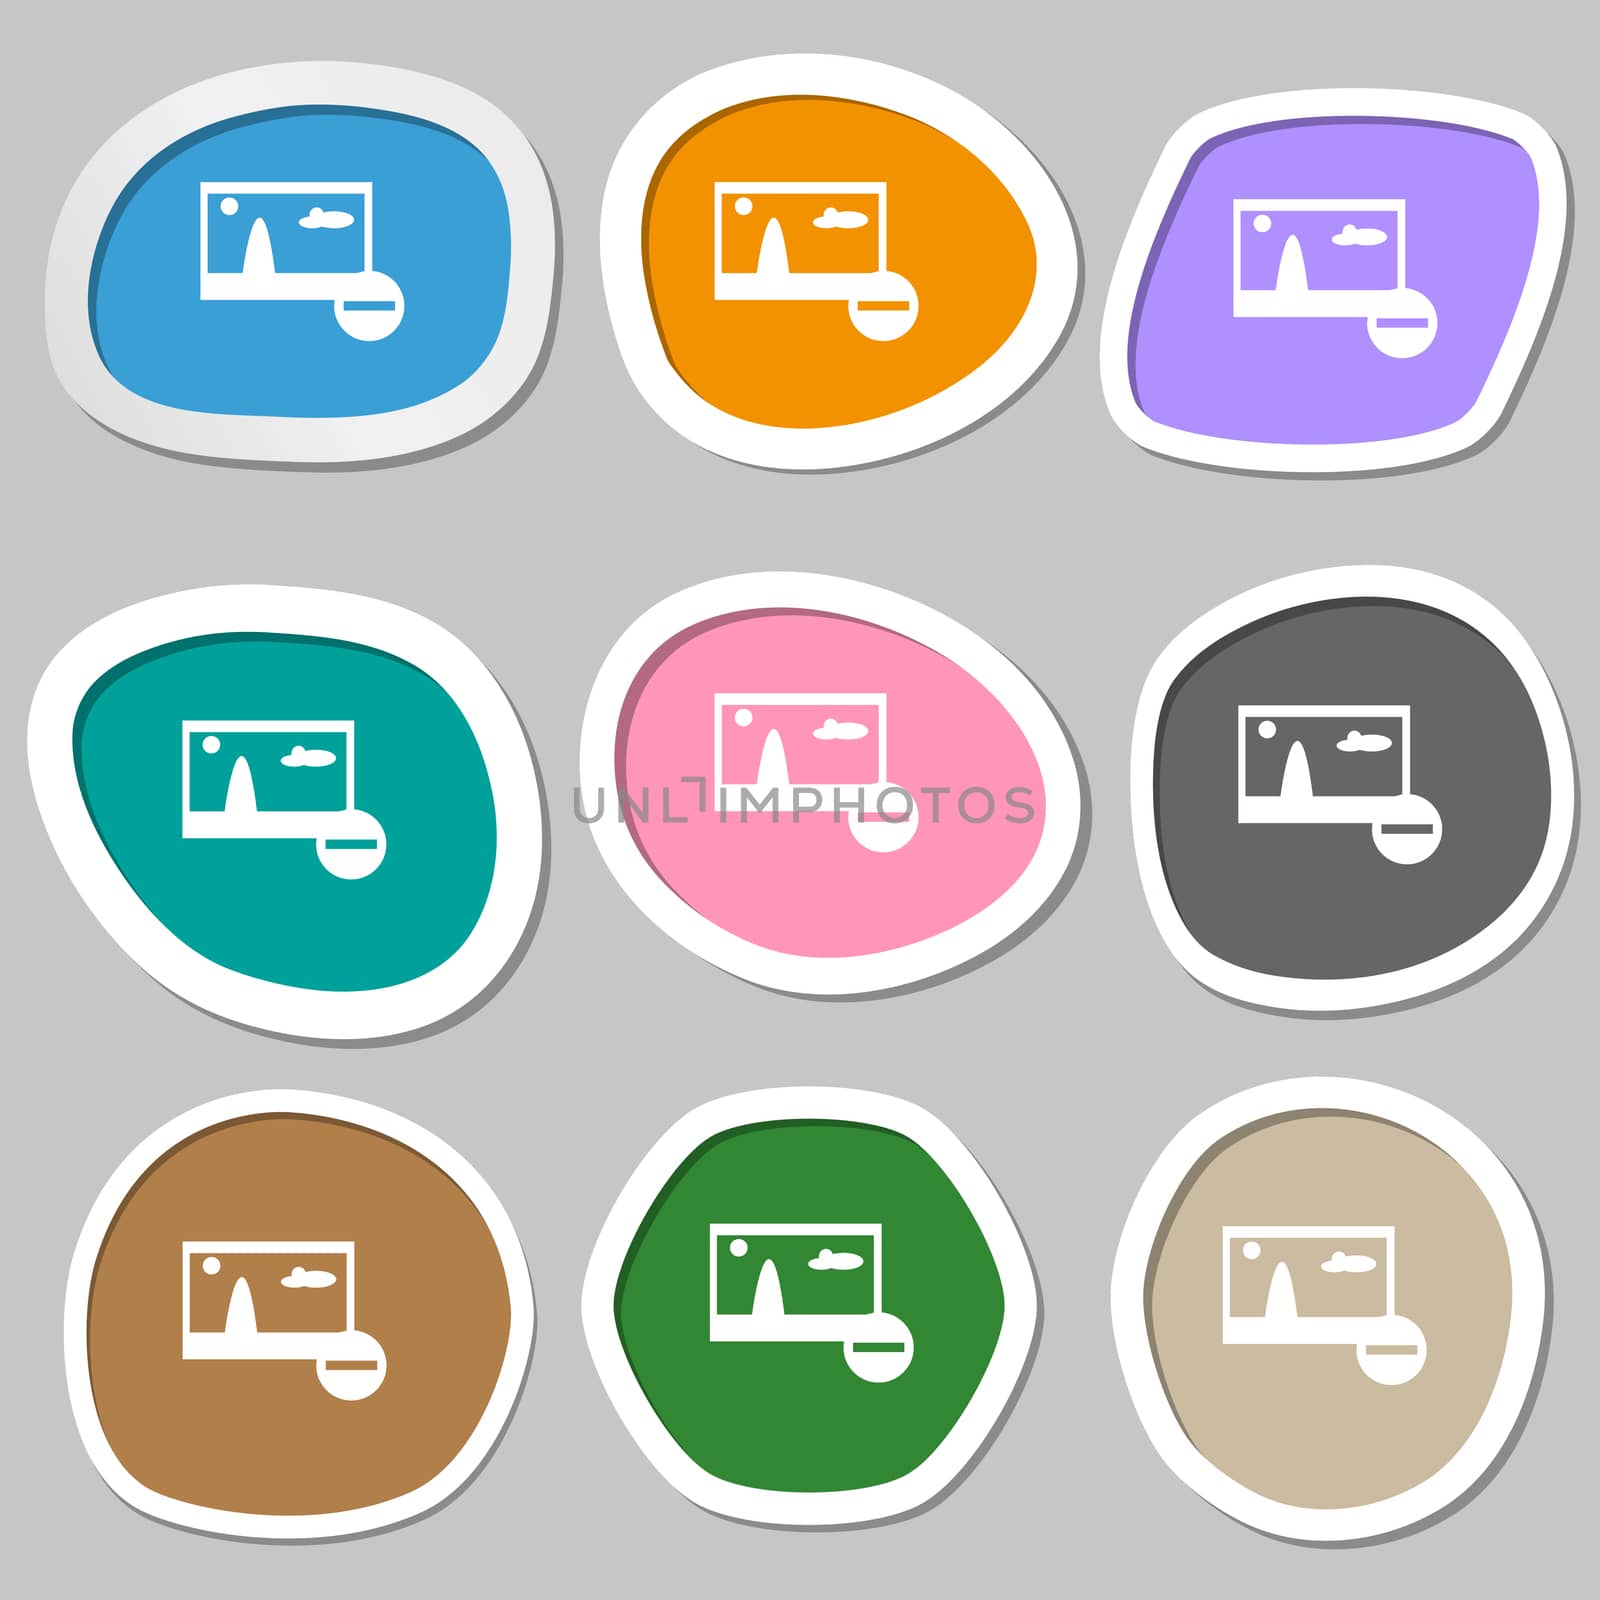 Minus File JPG sign icon. Download image file symbol. Set colourful buttons. Multicolored paper stickers. illustration